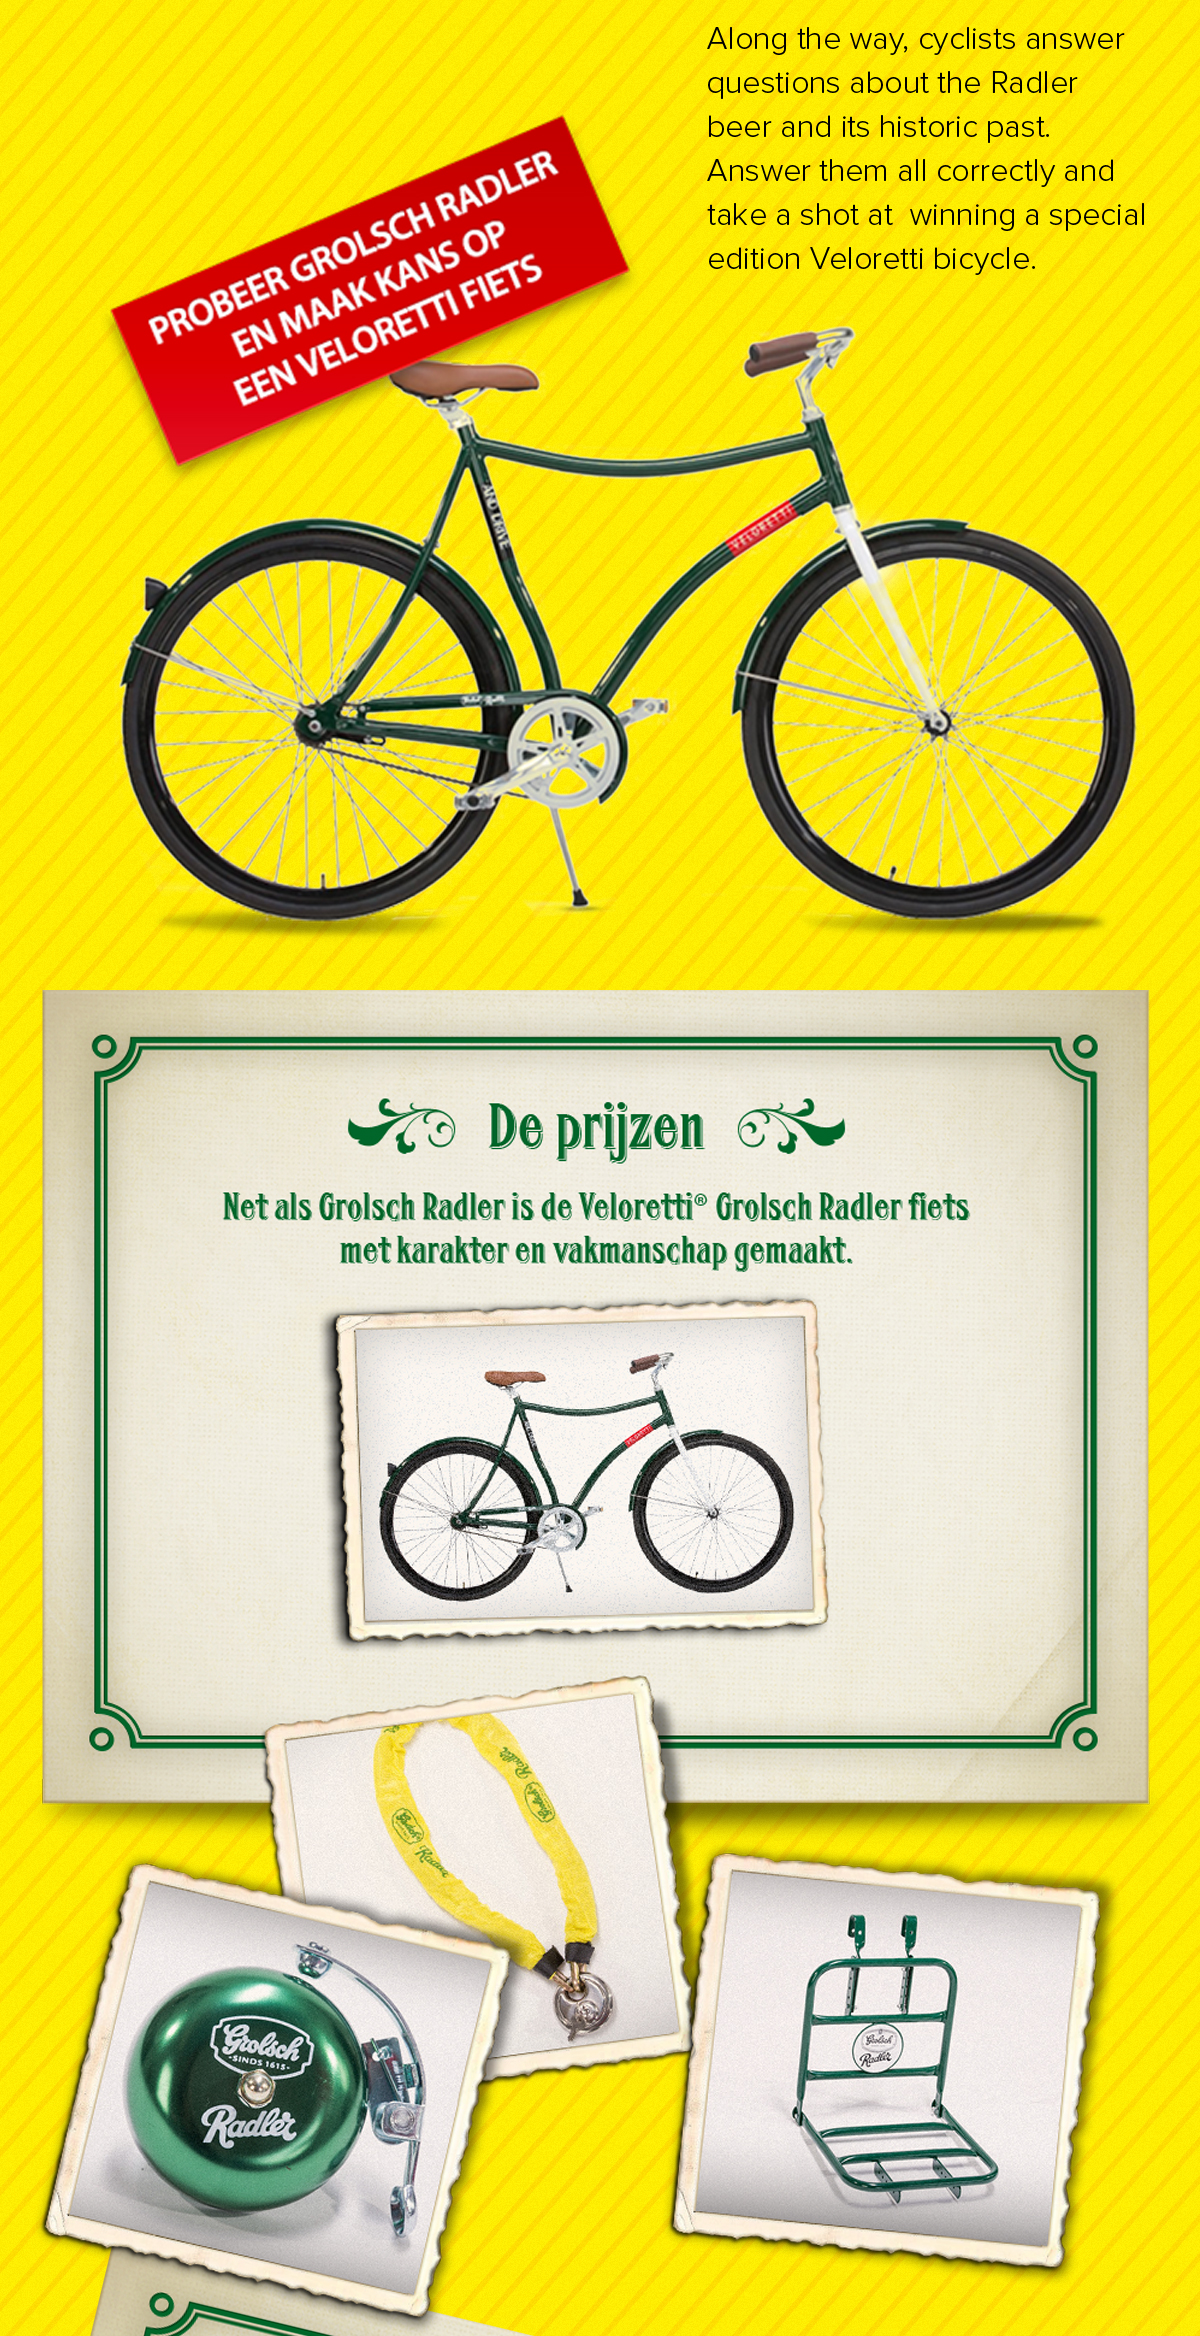 Grolsch Radler | Along the way, cyclists answer questions about the Radler beer and its historic past. Answer them all correctly and take a shot at  winning a special edition Veloretti bicycle.